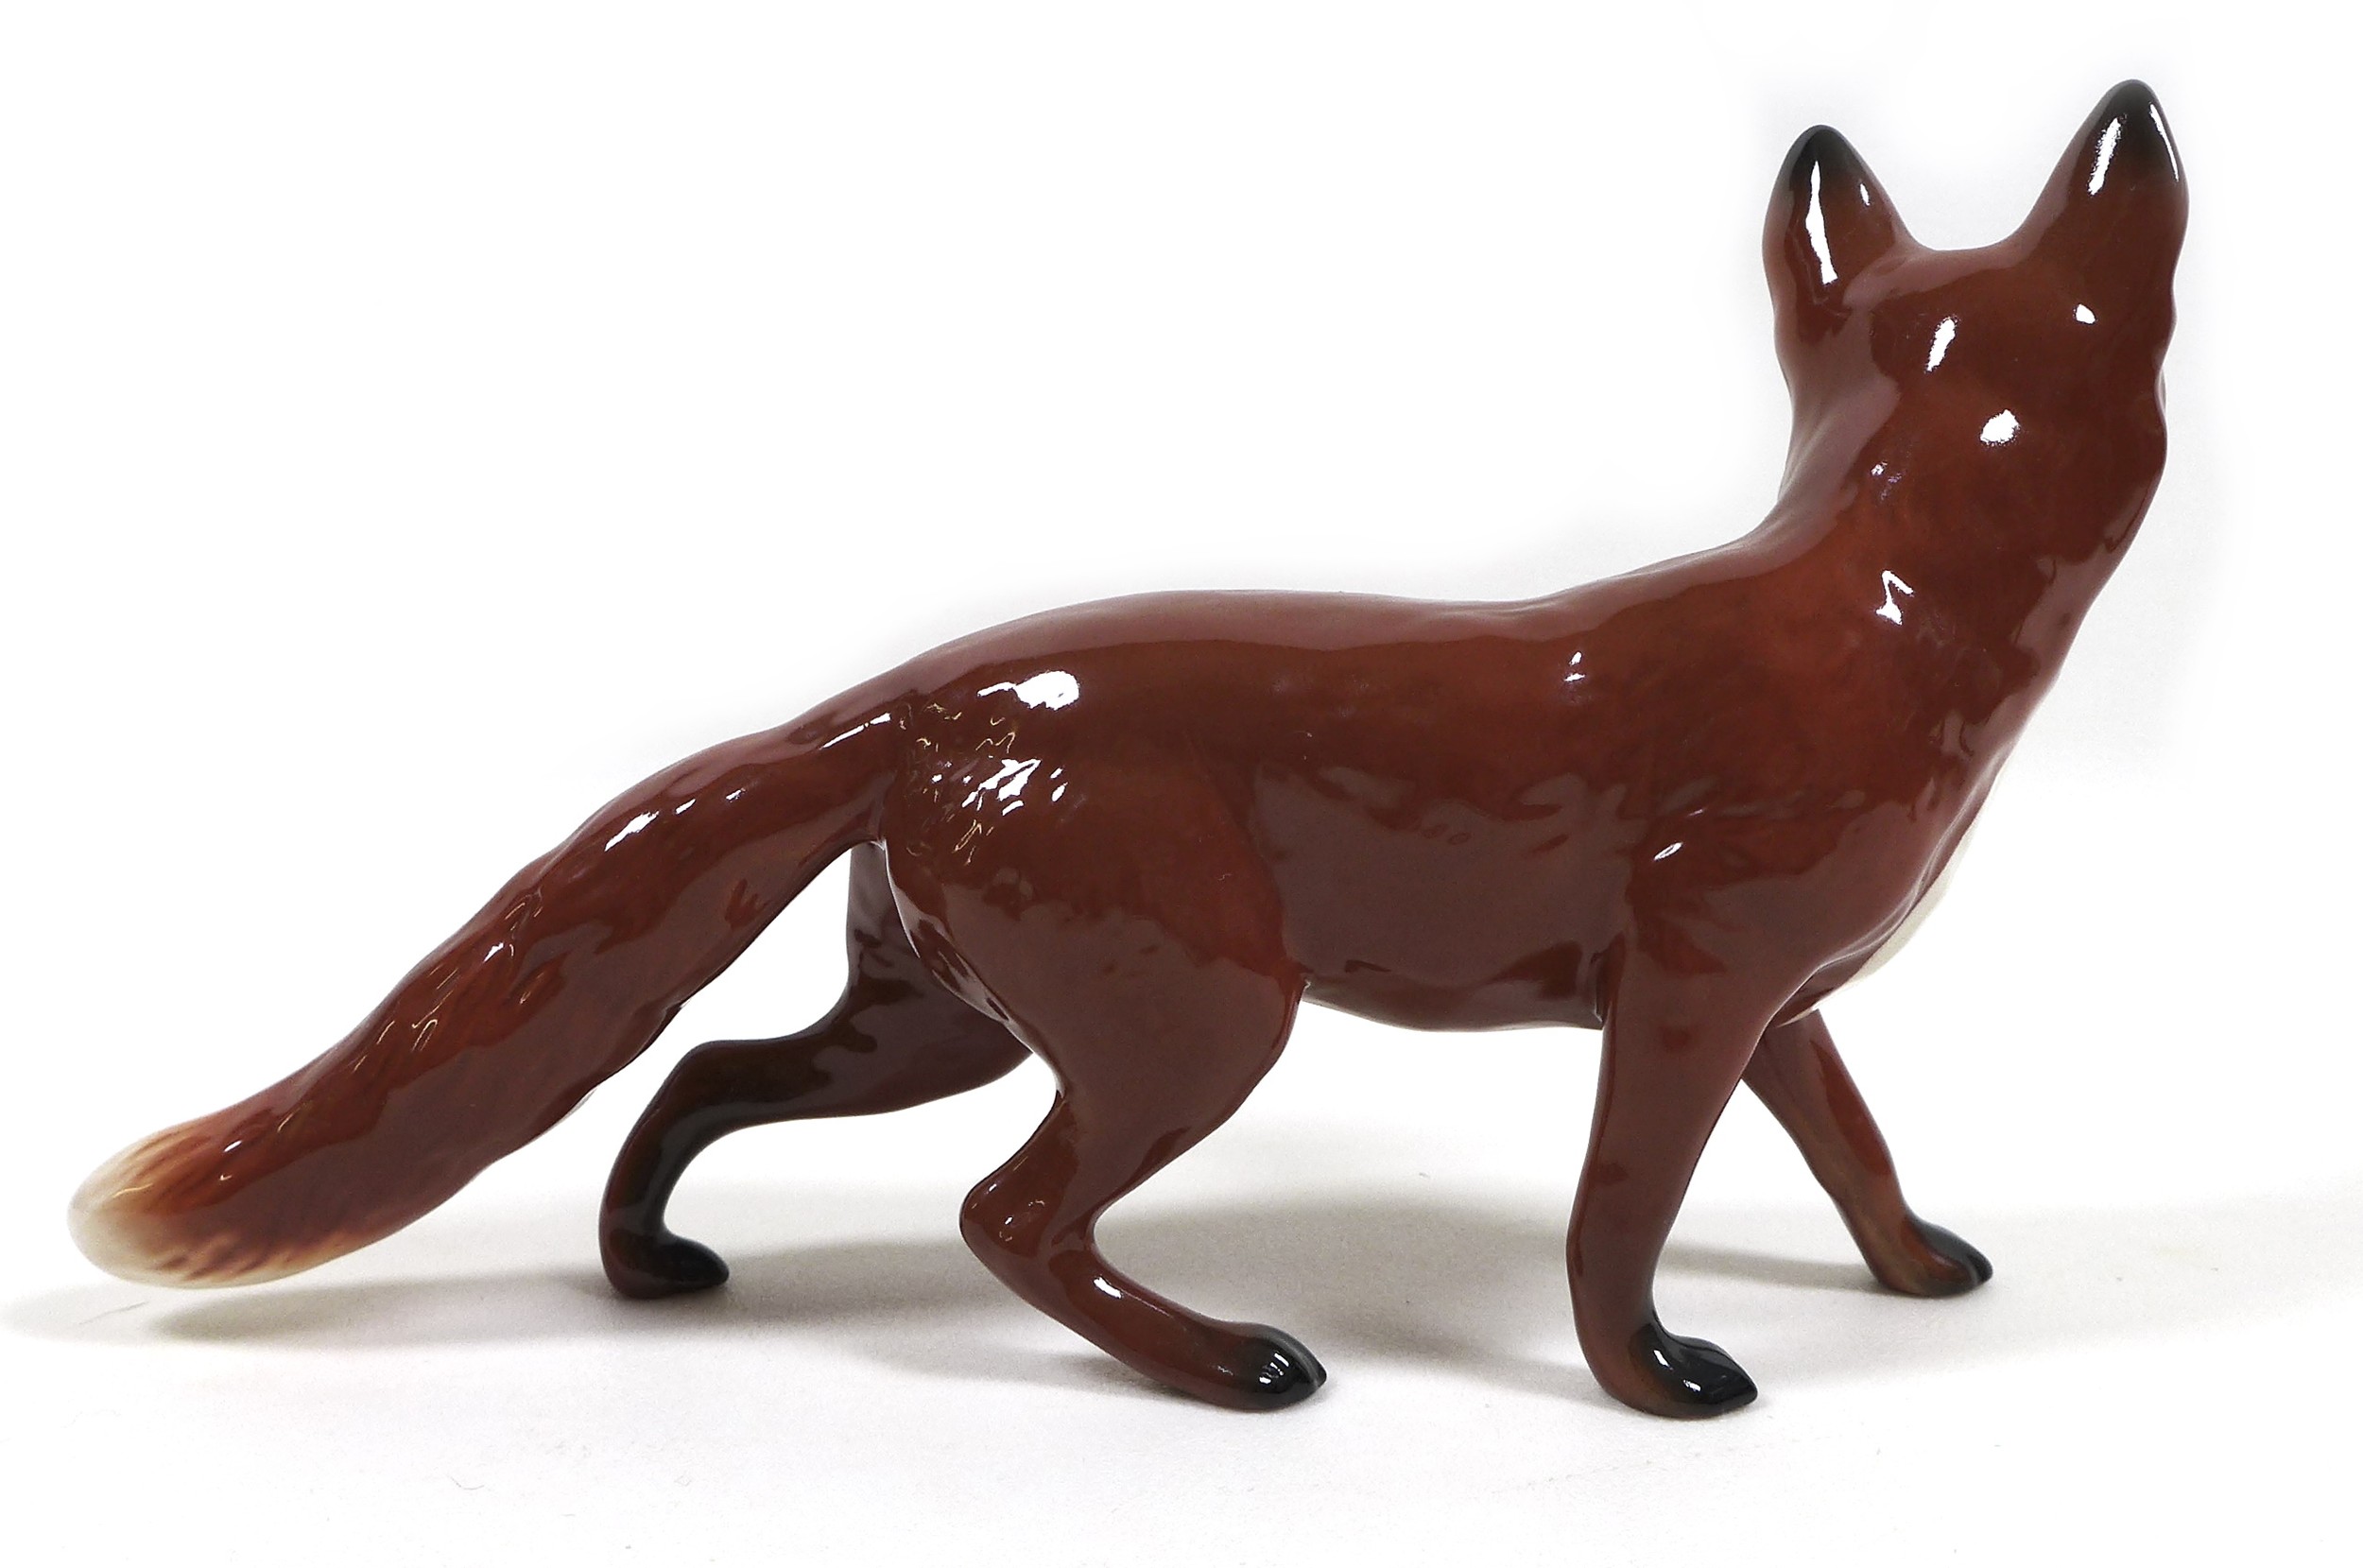 Three Beswick fox figurines, comprising 'Fox- standing', model 1440, red-brown and white - gloss, - Image 3 of 9